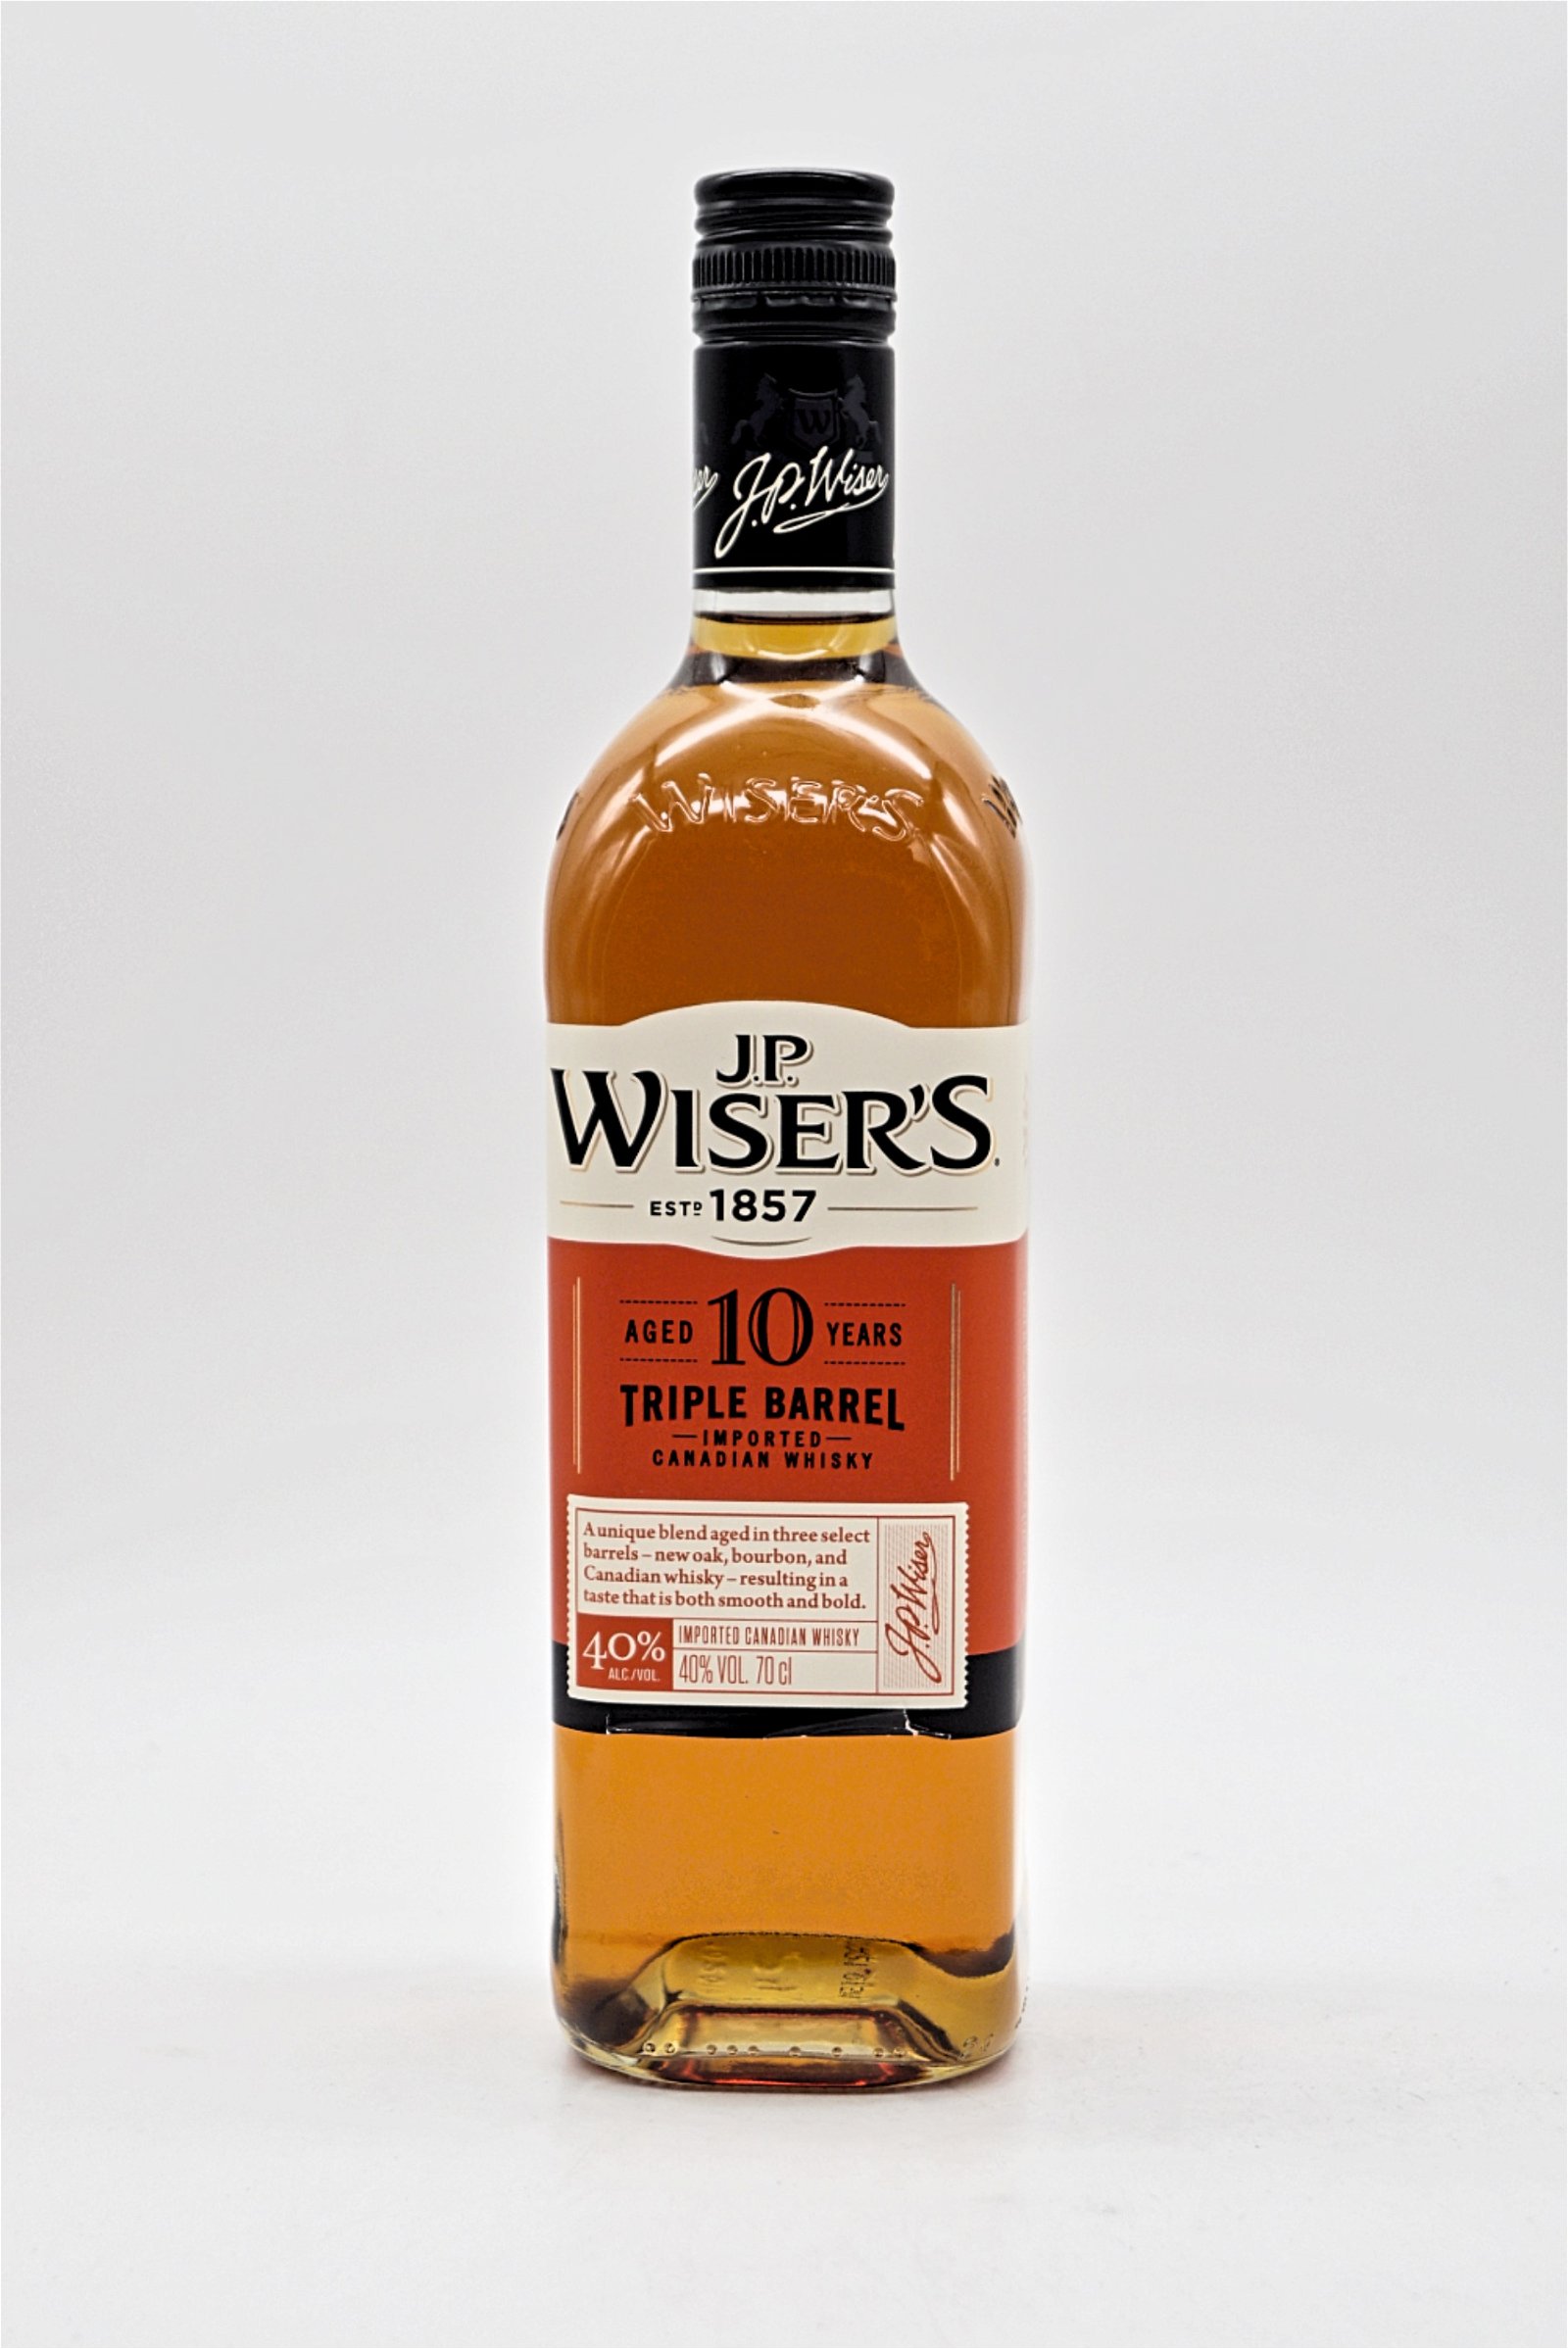 JP Wisers 10 Jahre Triple Barrel Imported Canadian Whisky